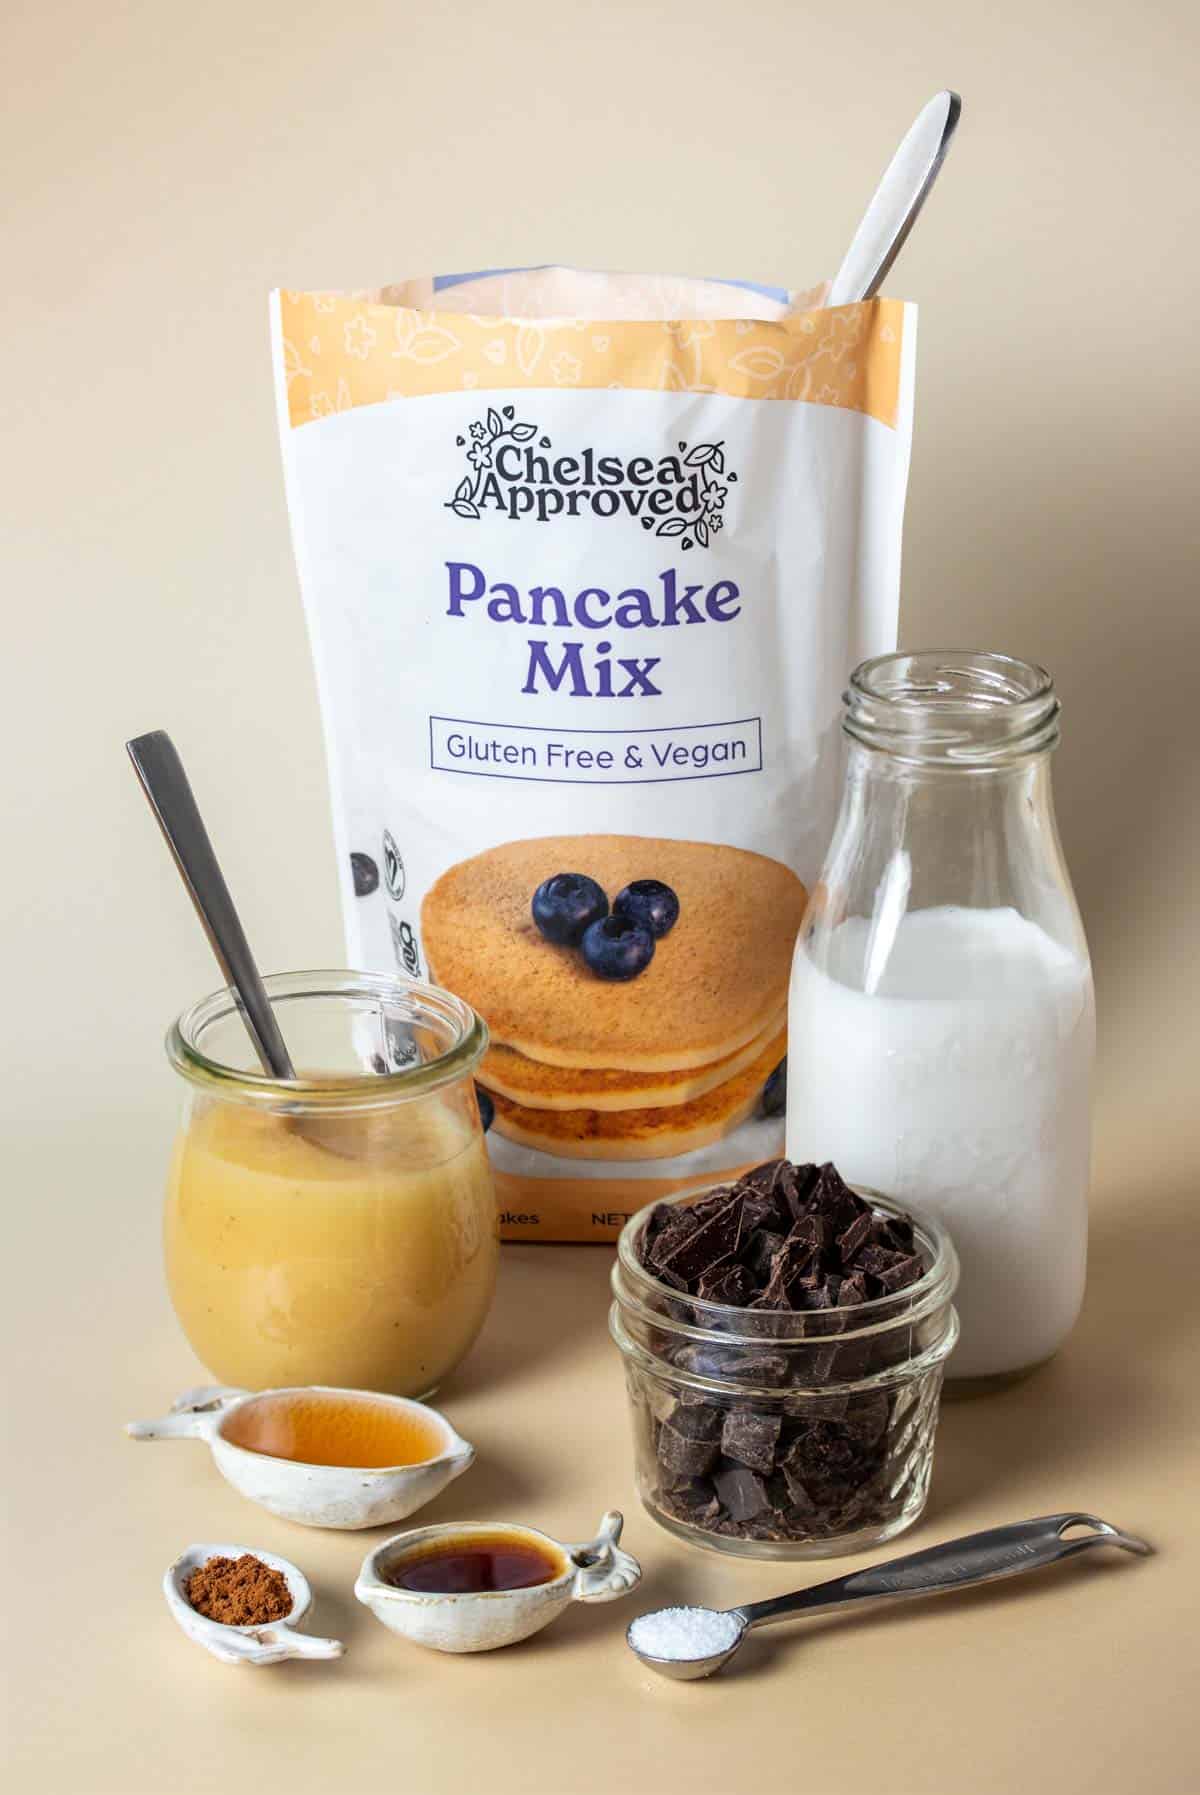 A bag of pancake mix on a tan surface with apple sauce, milk, chocolate chips, seasonings, and brown liquids in different bowls and spoons.